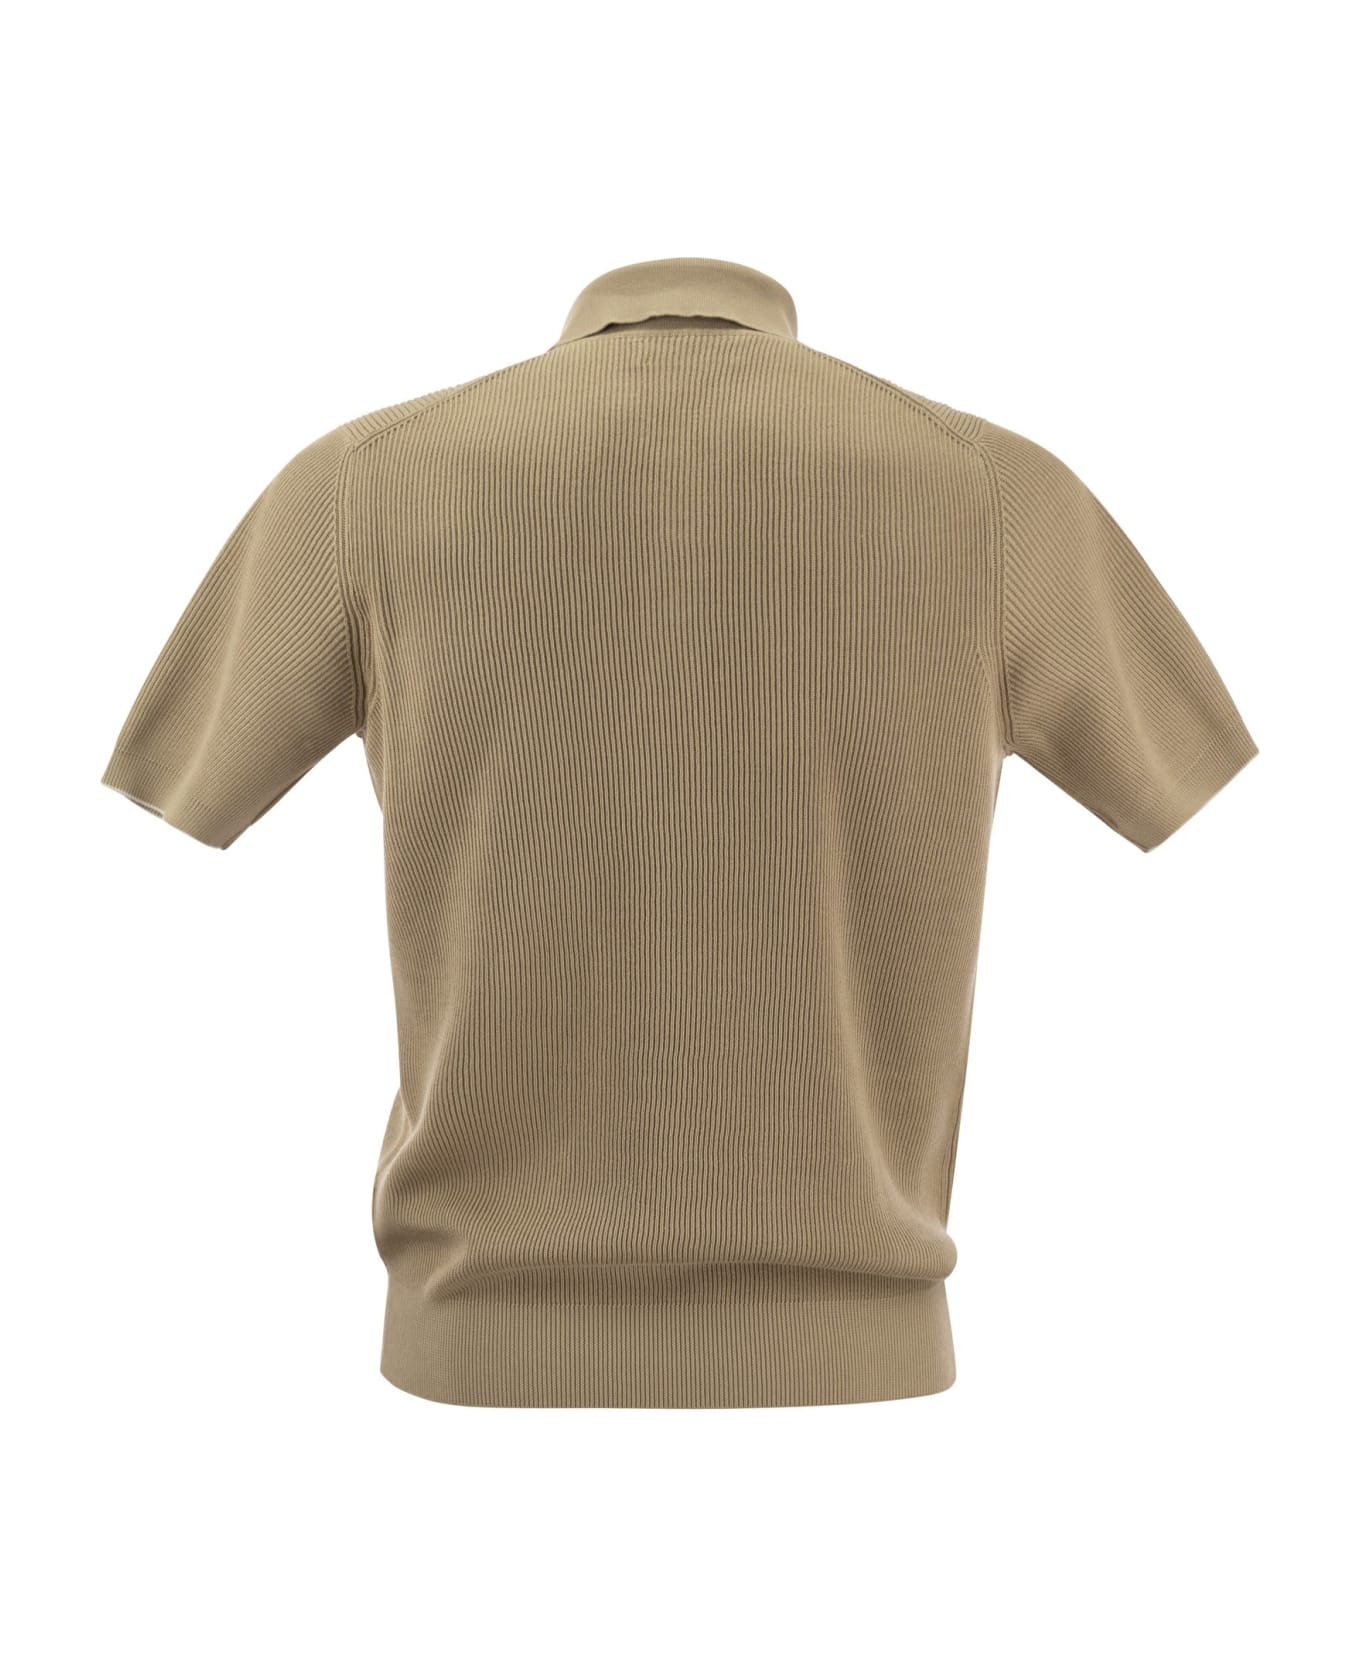 Brunello Cucinelli Ribbed Cotton Polo-style Jersey - Sand